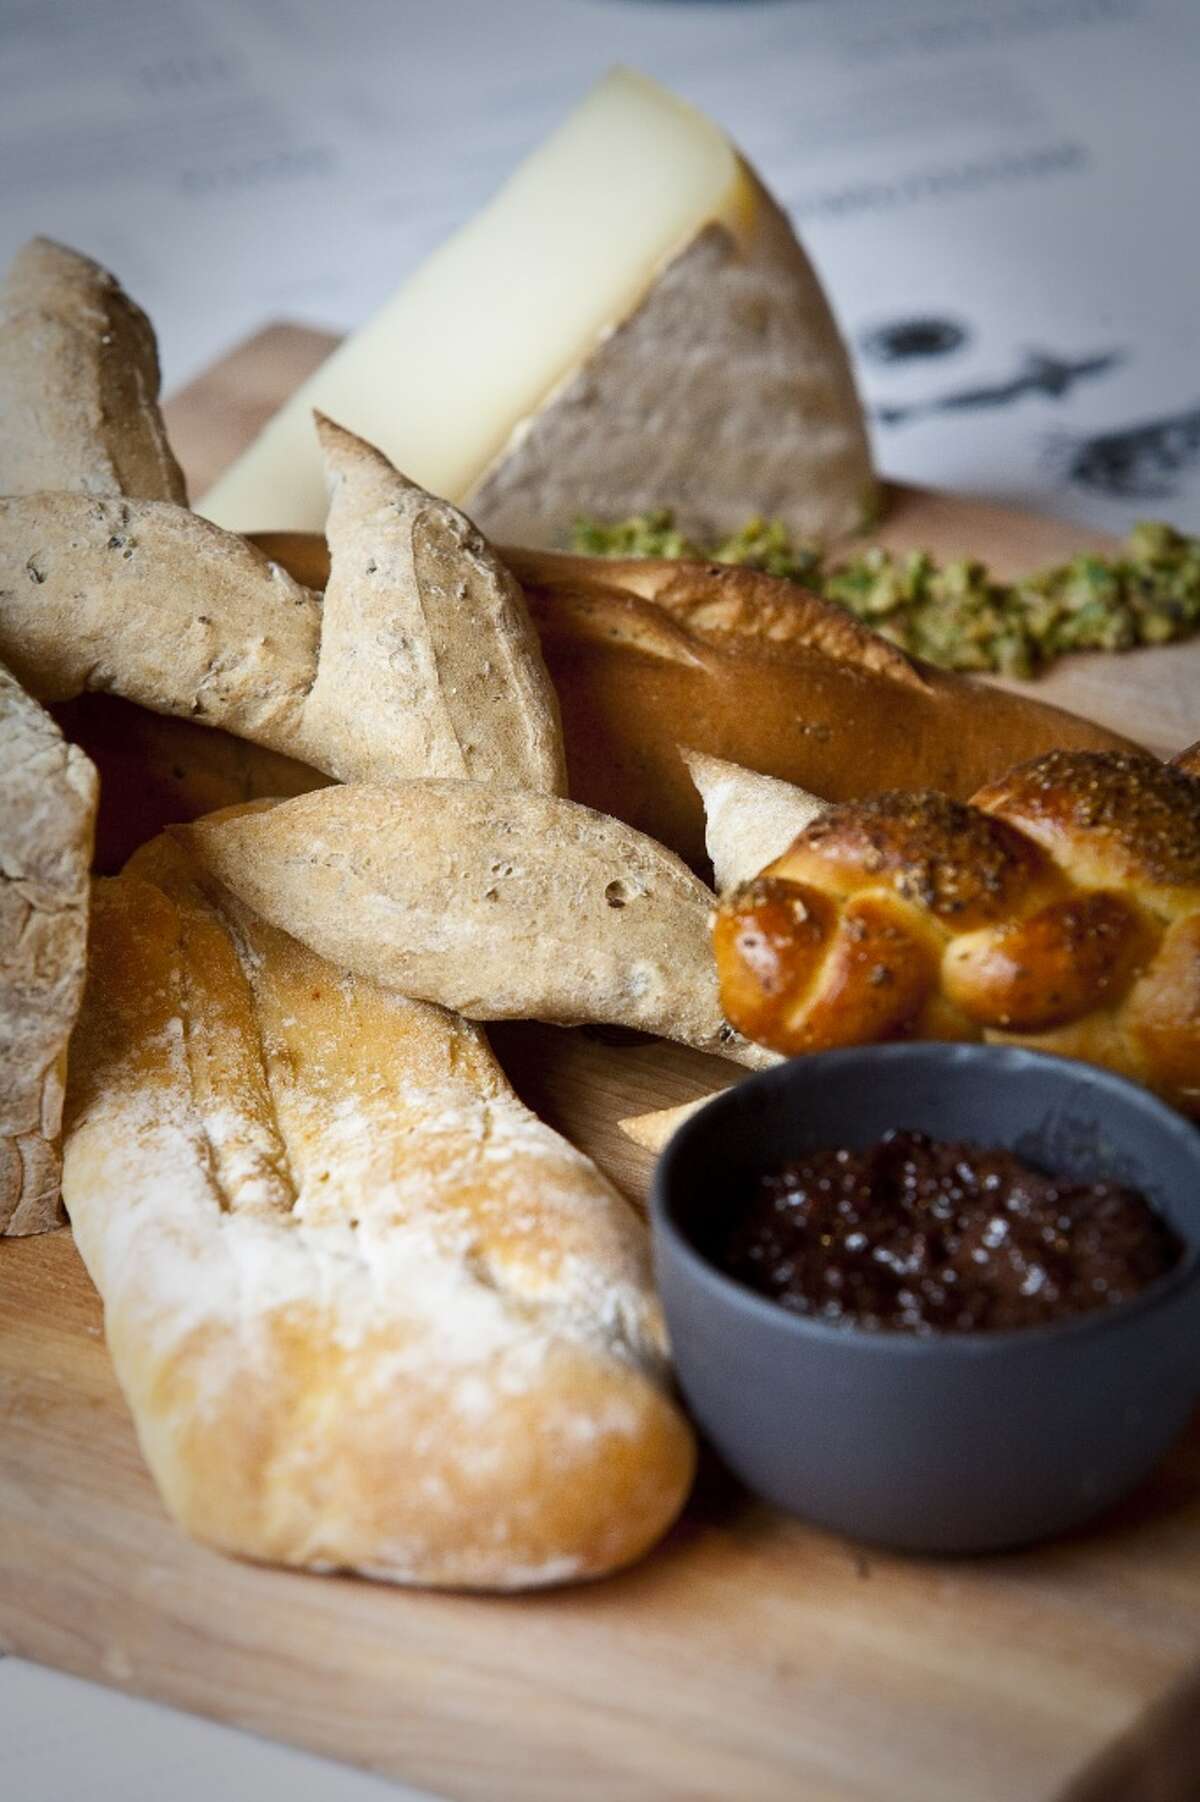 Provisions' various breads, with its meat and cheese pairings.